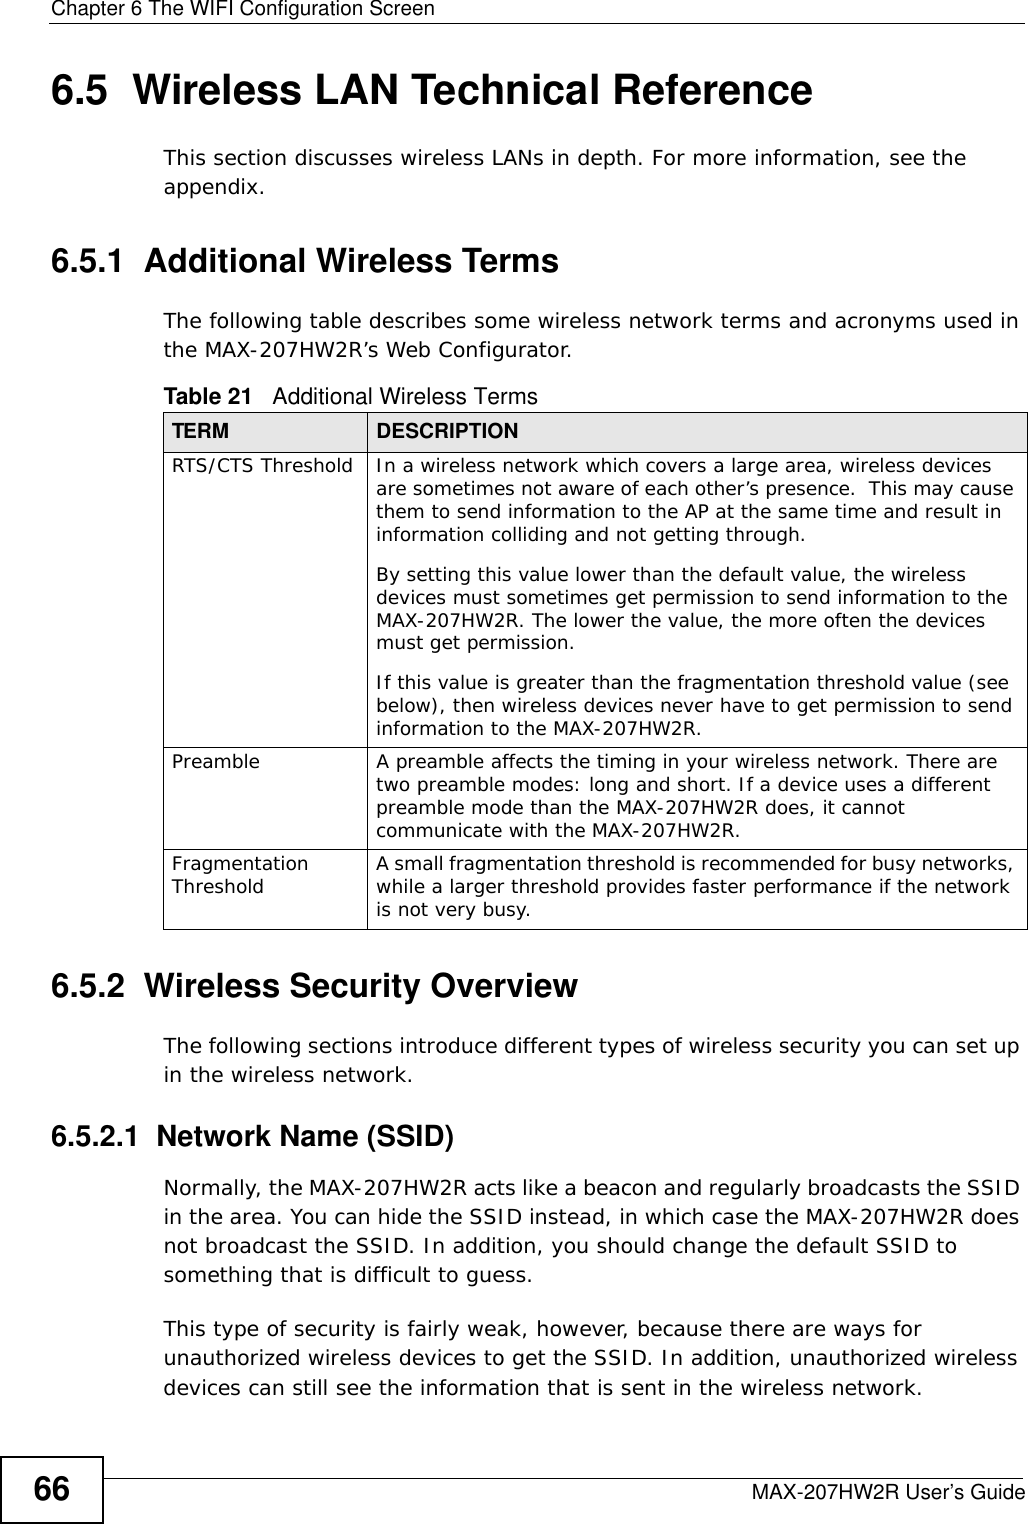 Chapter 6 The WIFI Configuration ScreenMAX-207HW2R User’s Guide666.5  Wireless LAN Technical ReferenceThis section discusses wireless LANs in depth. For more information, see the appendix.6.5.1  Additional Wireless TermsThe following table describes some wireless network terms and acronyms used in the MAX-207HW2R’s Web Configurator.6.5.2  Wireless Security OverviewThe following sections introduce different types of wireless security you can set up in the wireless network.6.5.2.1  Network Name (SSID)Normally, the MAX-207HW2R acts like a beacon and regularly broadcasts the SSID in the area. You can hide the SSID instead, in which case the MAX-207HW2R does not broadcast the SSID. In addition, you should change the default SSID to something that is difficult to guess.This type of security is fairly weak, however, because there are ways for unauthorized wireless devices to get the SSID. In addition, unauthorized wireless devices can still see the information that is sent in the wireless network.Table 21   Additional Wireless TermsTERM DESCRIPTIONRTS/CTS Threshold In a wireless network which covers a large area, wireless devices are sometimes not aware of each other’s presence.  This may cause them to send information to the AP at the same time and result in information colliding and not getting through.By setting this value lower than the default value, the wireless devices must sometimes get permission to send information to the MAX-207HW2R. The lower the value, the more often the devices must get permission.If this value is greater than the fragmentation threshold value (see below), then wireless devices never have to get permission to send information to the MAX-207HW2R.Preamble A preamble affects the timing in your wireless network. There are two preamble modes: long and short. If a device uses a different preamble mode than the MAX-207HW2R does, it cannot communicate with the MAX-207HW2R.Fragmentation Threshold A small fragmentation threshold is recommended for busy networks, while a larger threshold provides faster performance if the network is not very busy.